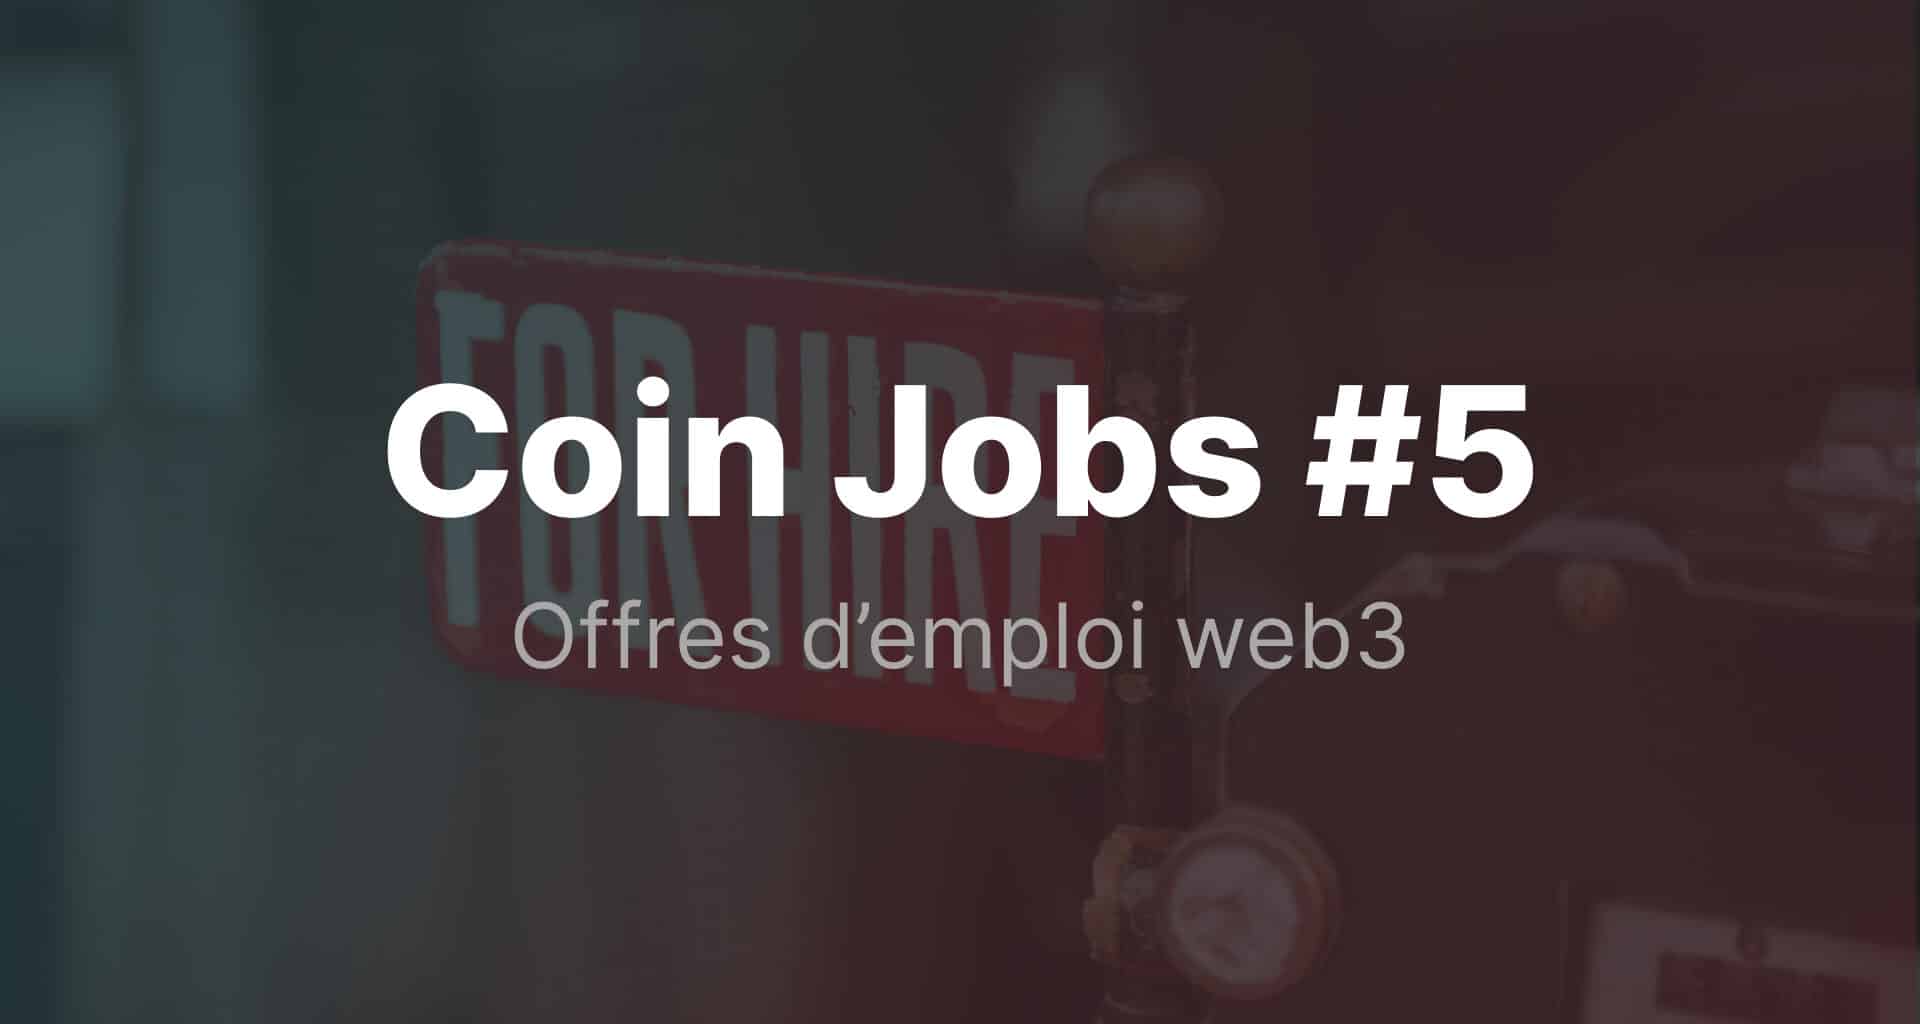 CoinJobs offre d'emploi web3